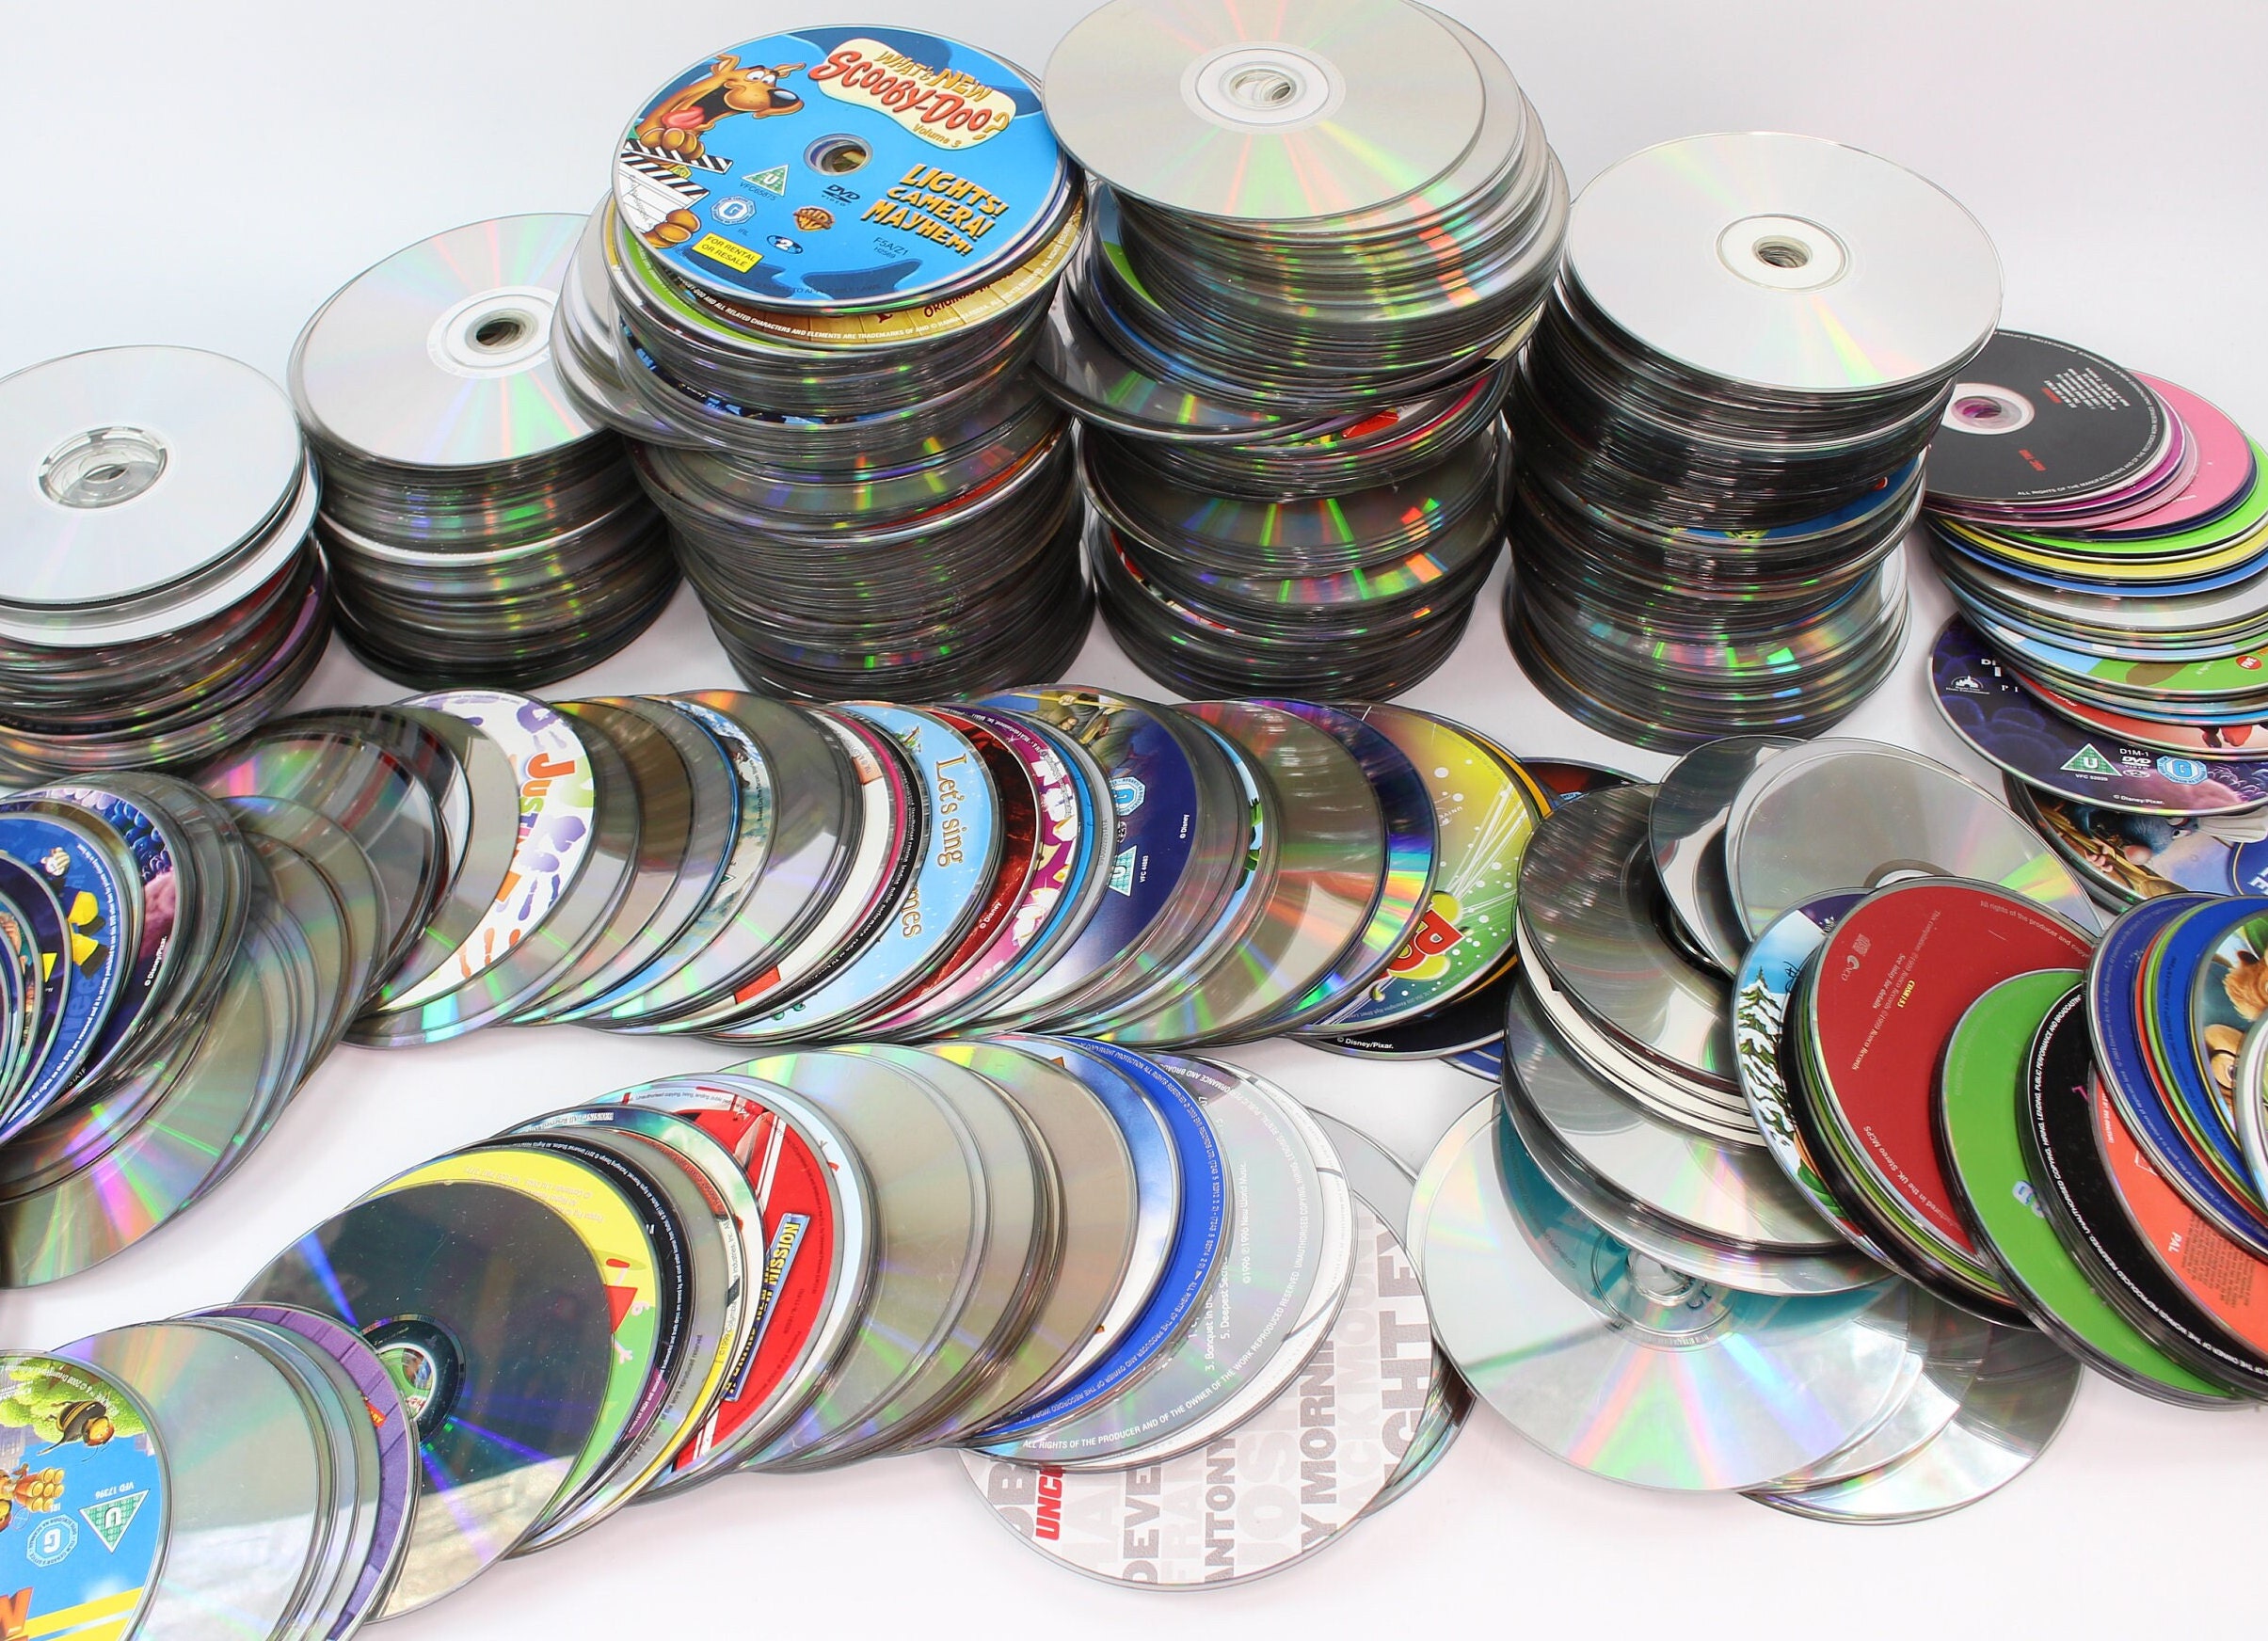 Bundle of Used/ Scratched Cds and Dvds Discs Reflectors for Crafts, Art  Projects Allotment Scarecrow 25, 50, 75 or 100 